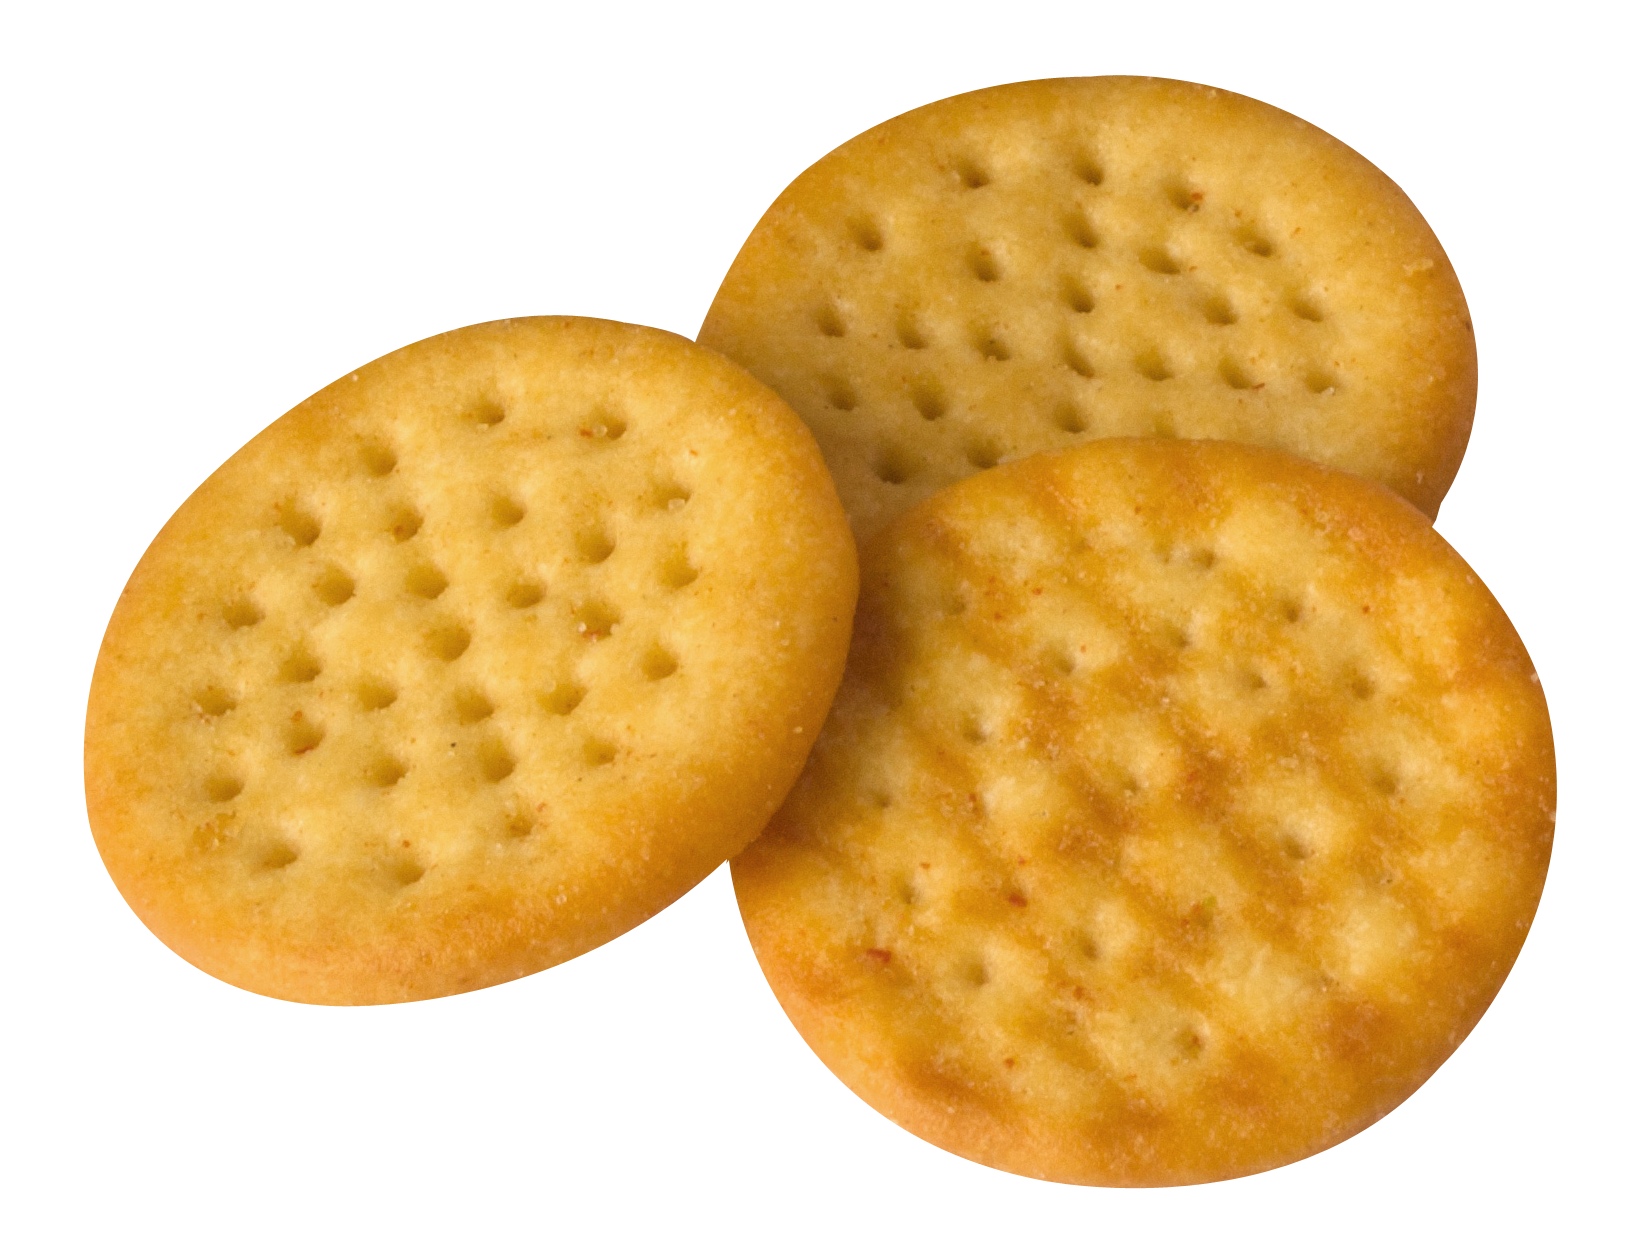 A Group Of Crackers On A Black Background